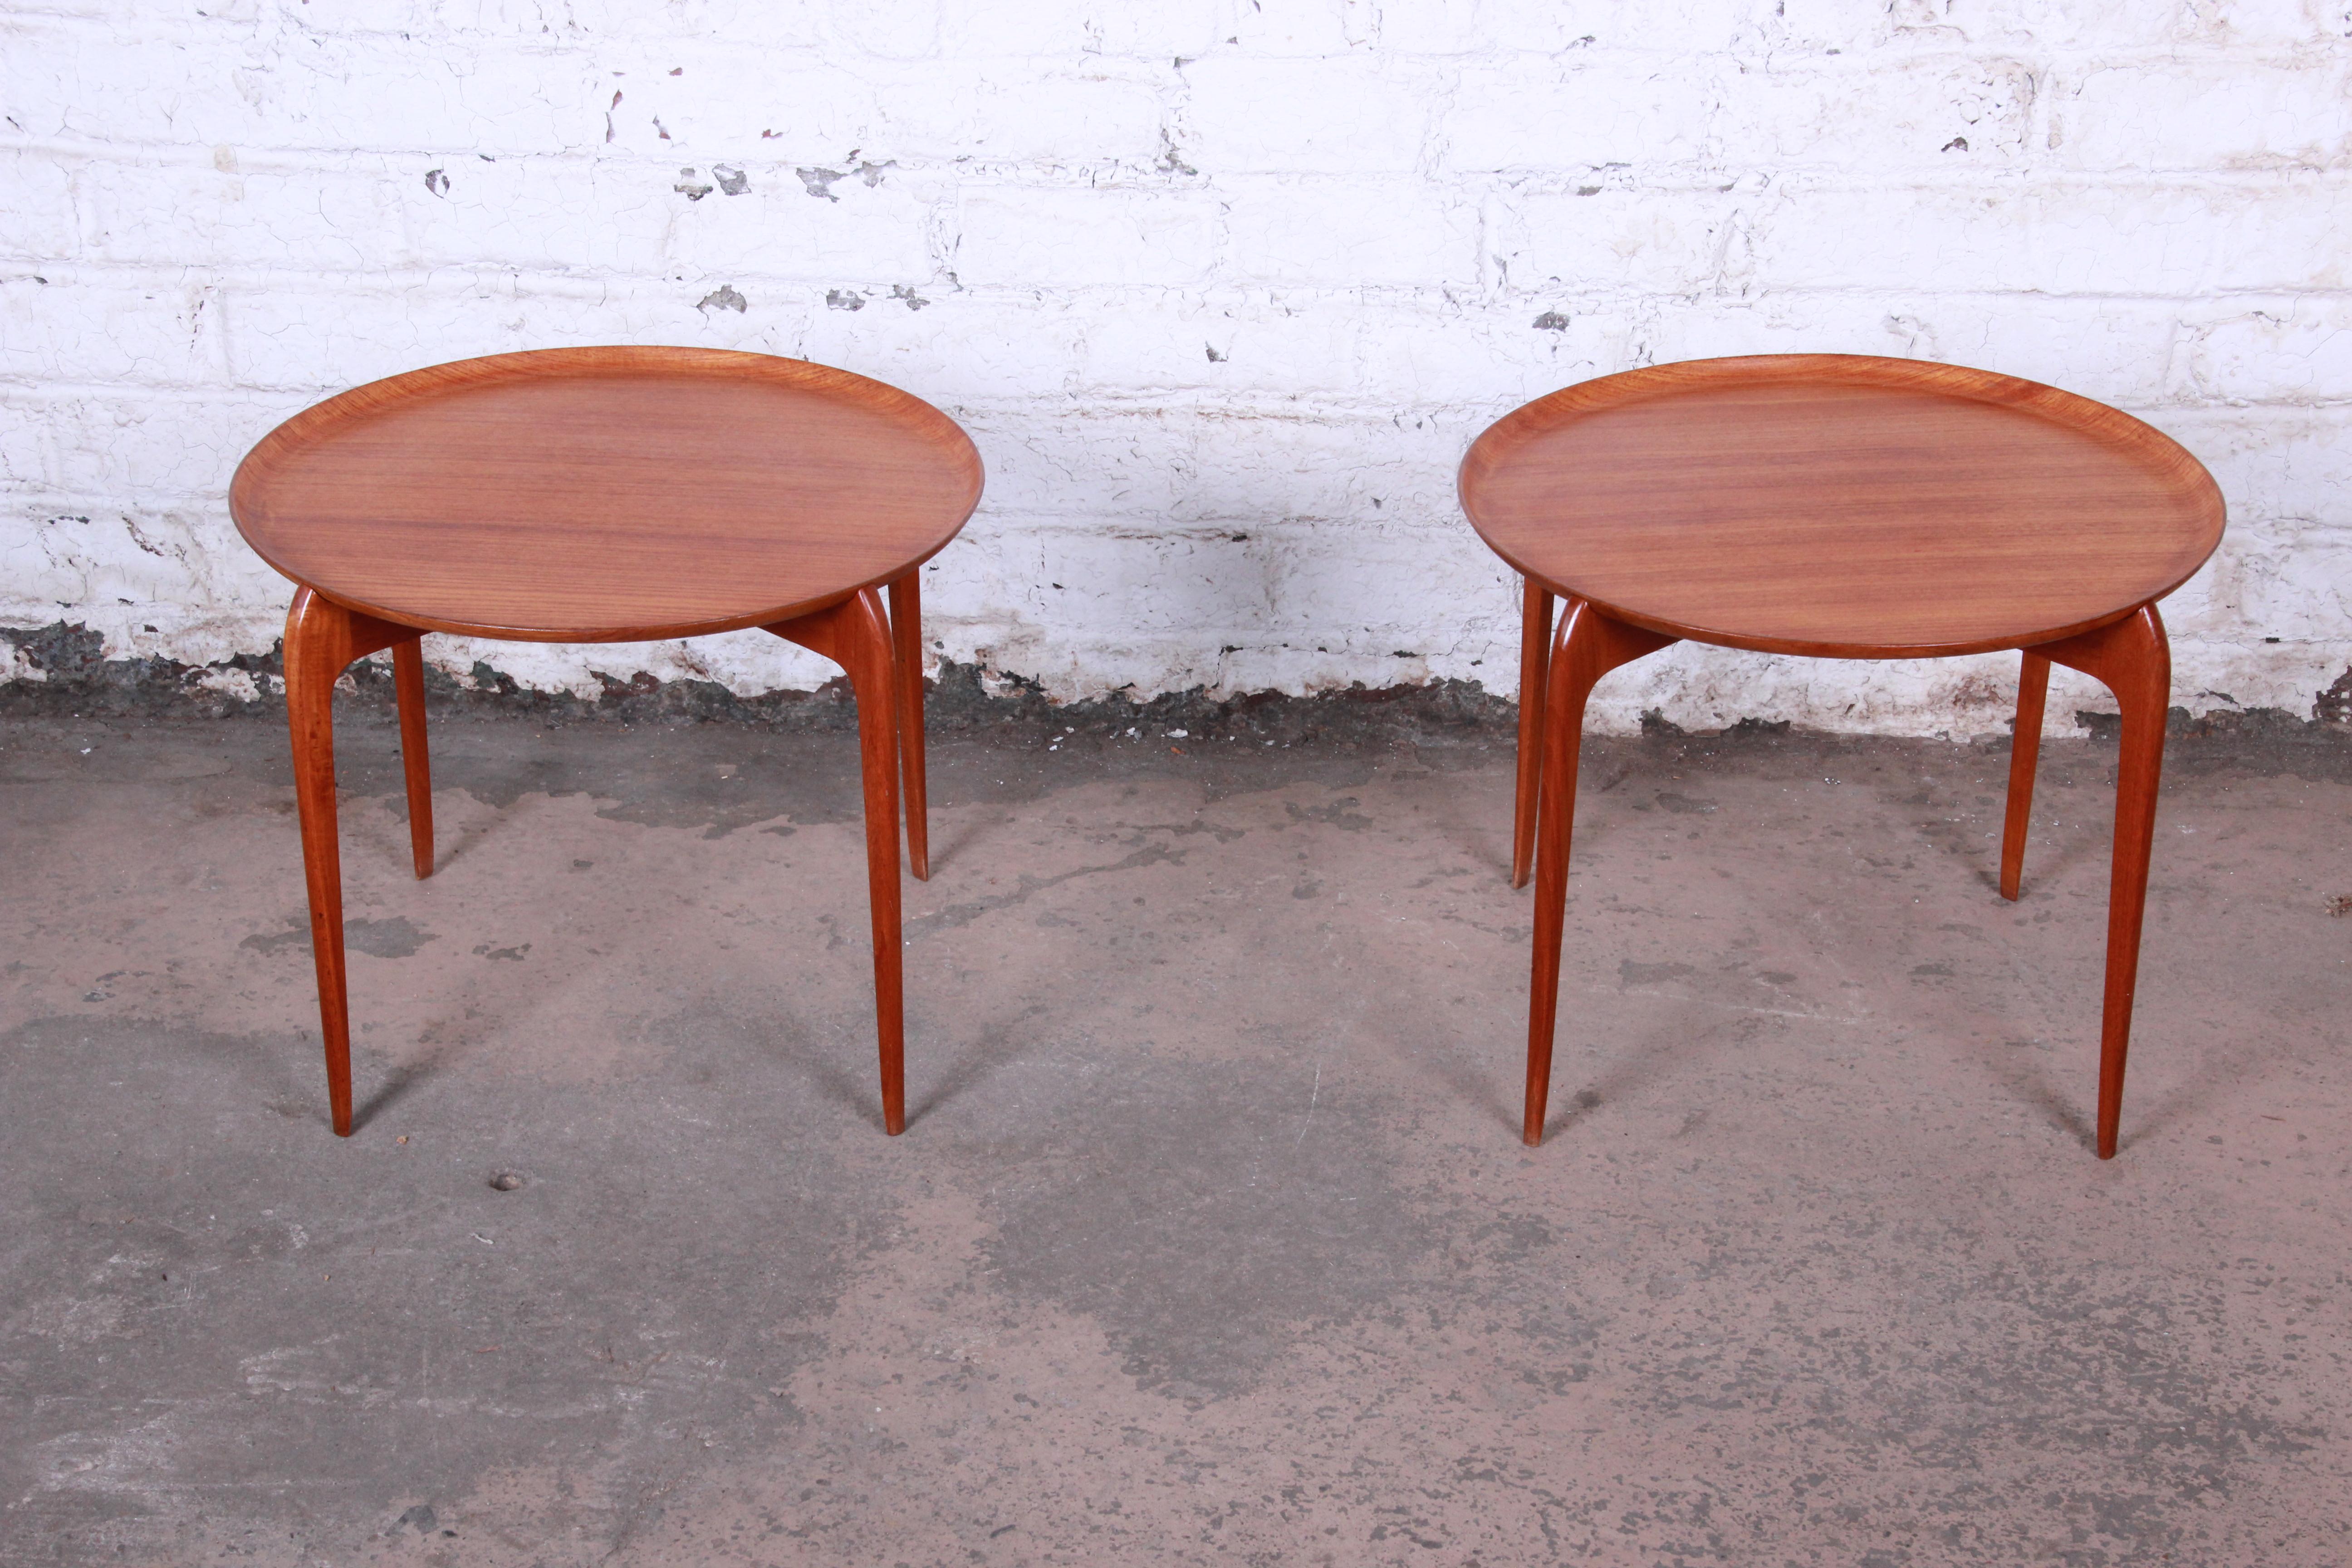 An exceptional pair of Danish Modern teak tray tables by Moreddi. The tables feature gorgeous teak wood grain and unique removable tray tops. Nice sleek, minimalist Danish design. The original Moreddi labels are present on the underside of each